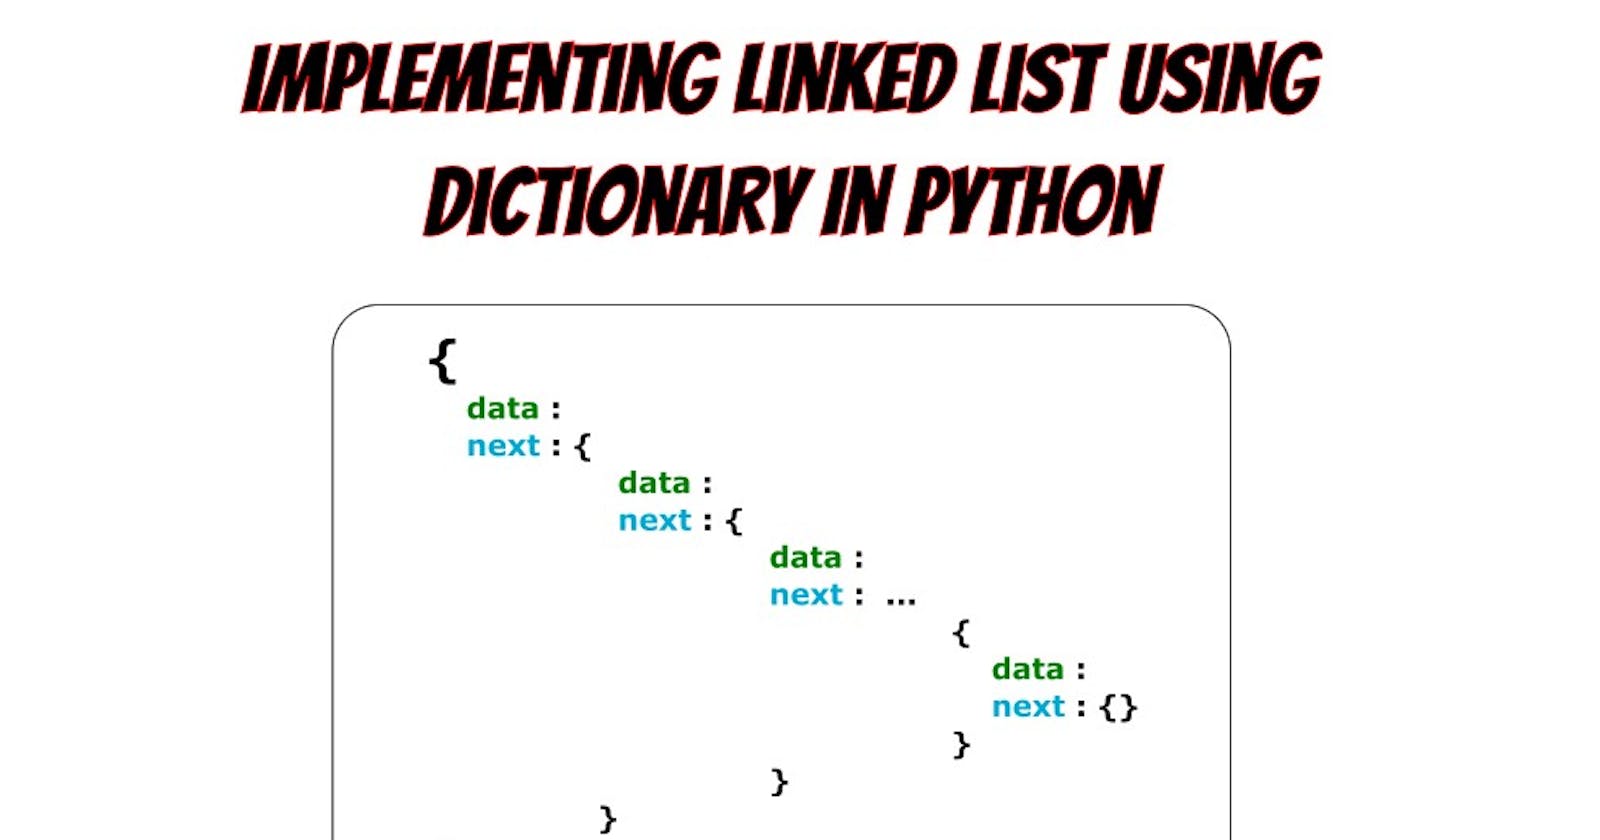 How to implement Linked List using Dictionary in Python